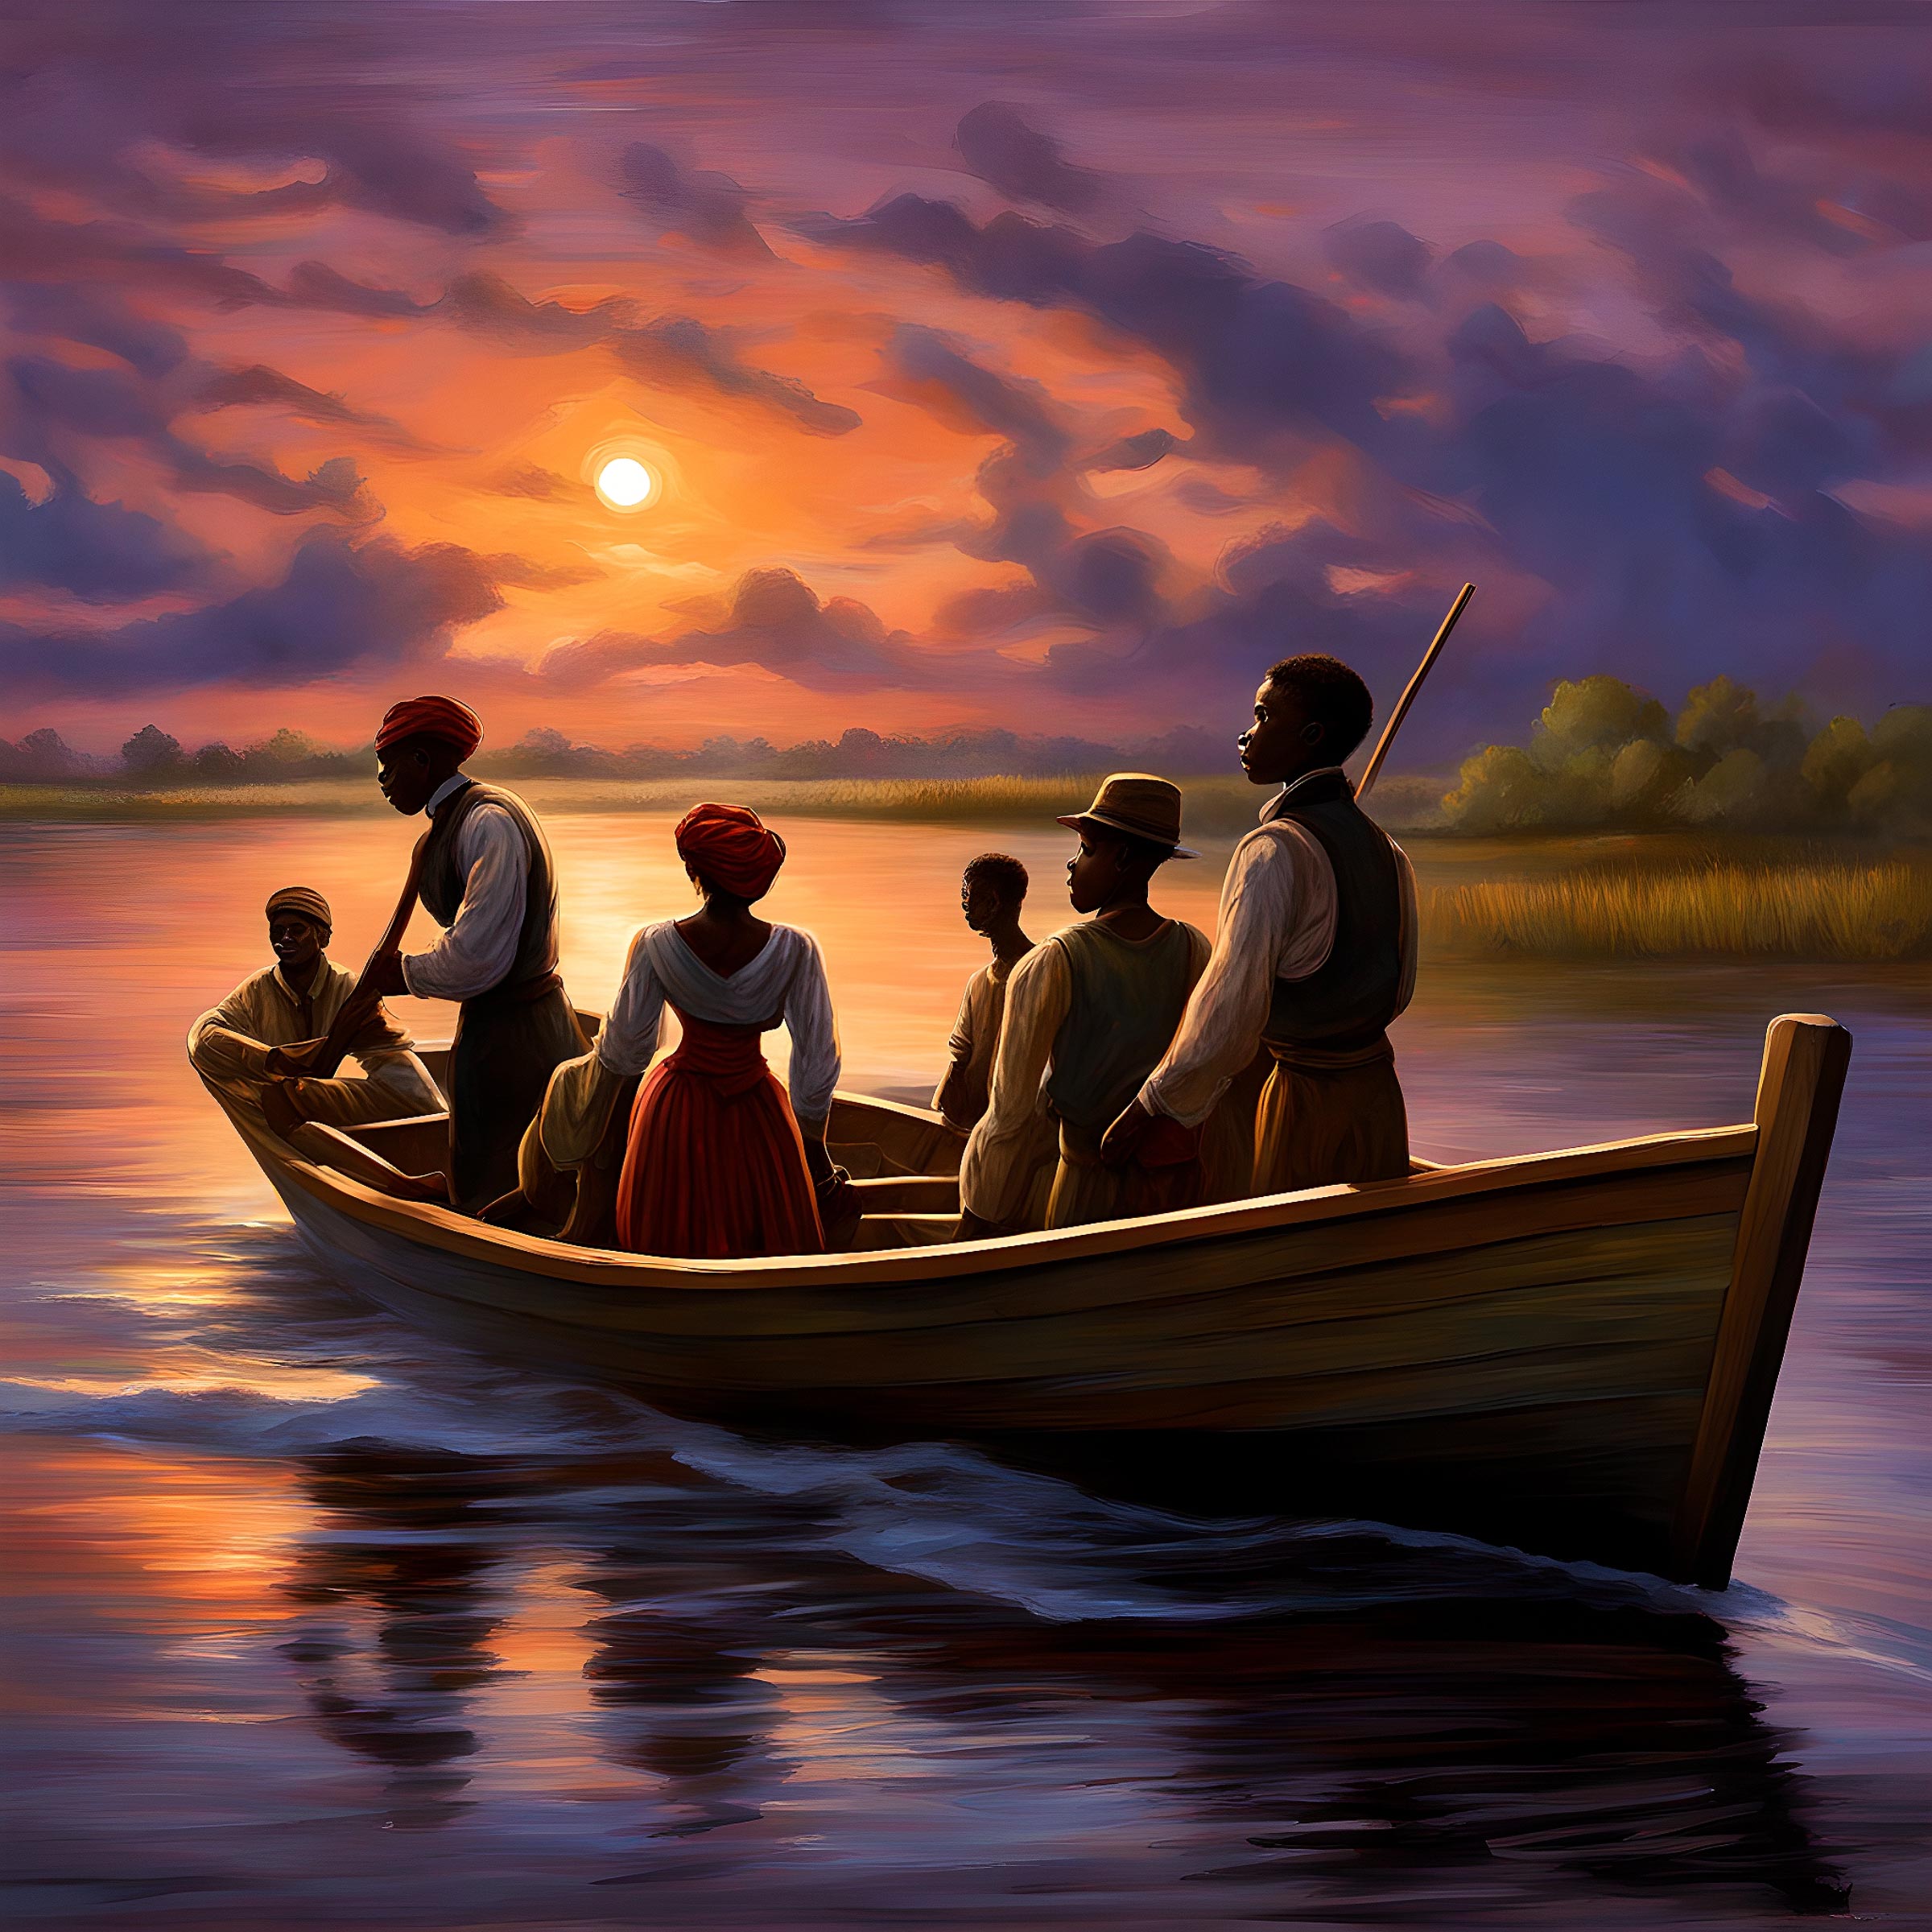 A wooden boat travels down a river at dusk with six passengers